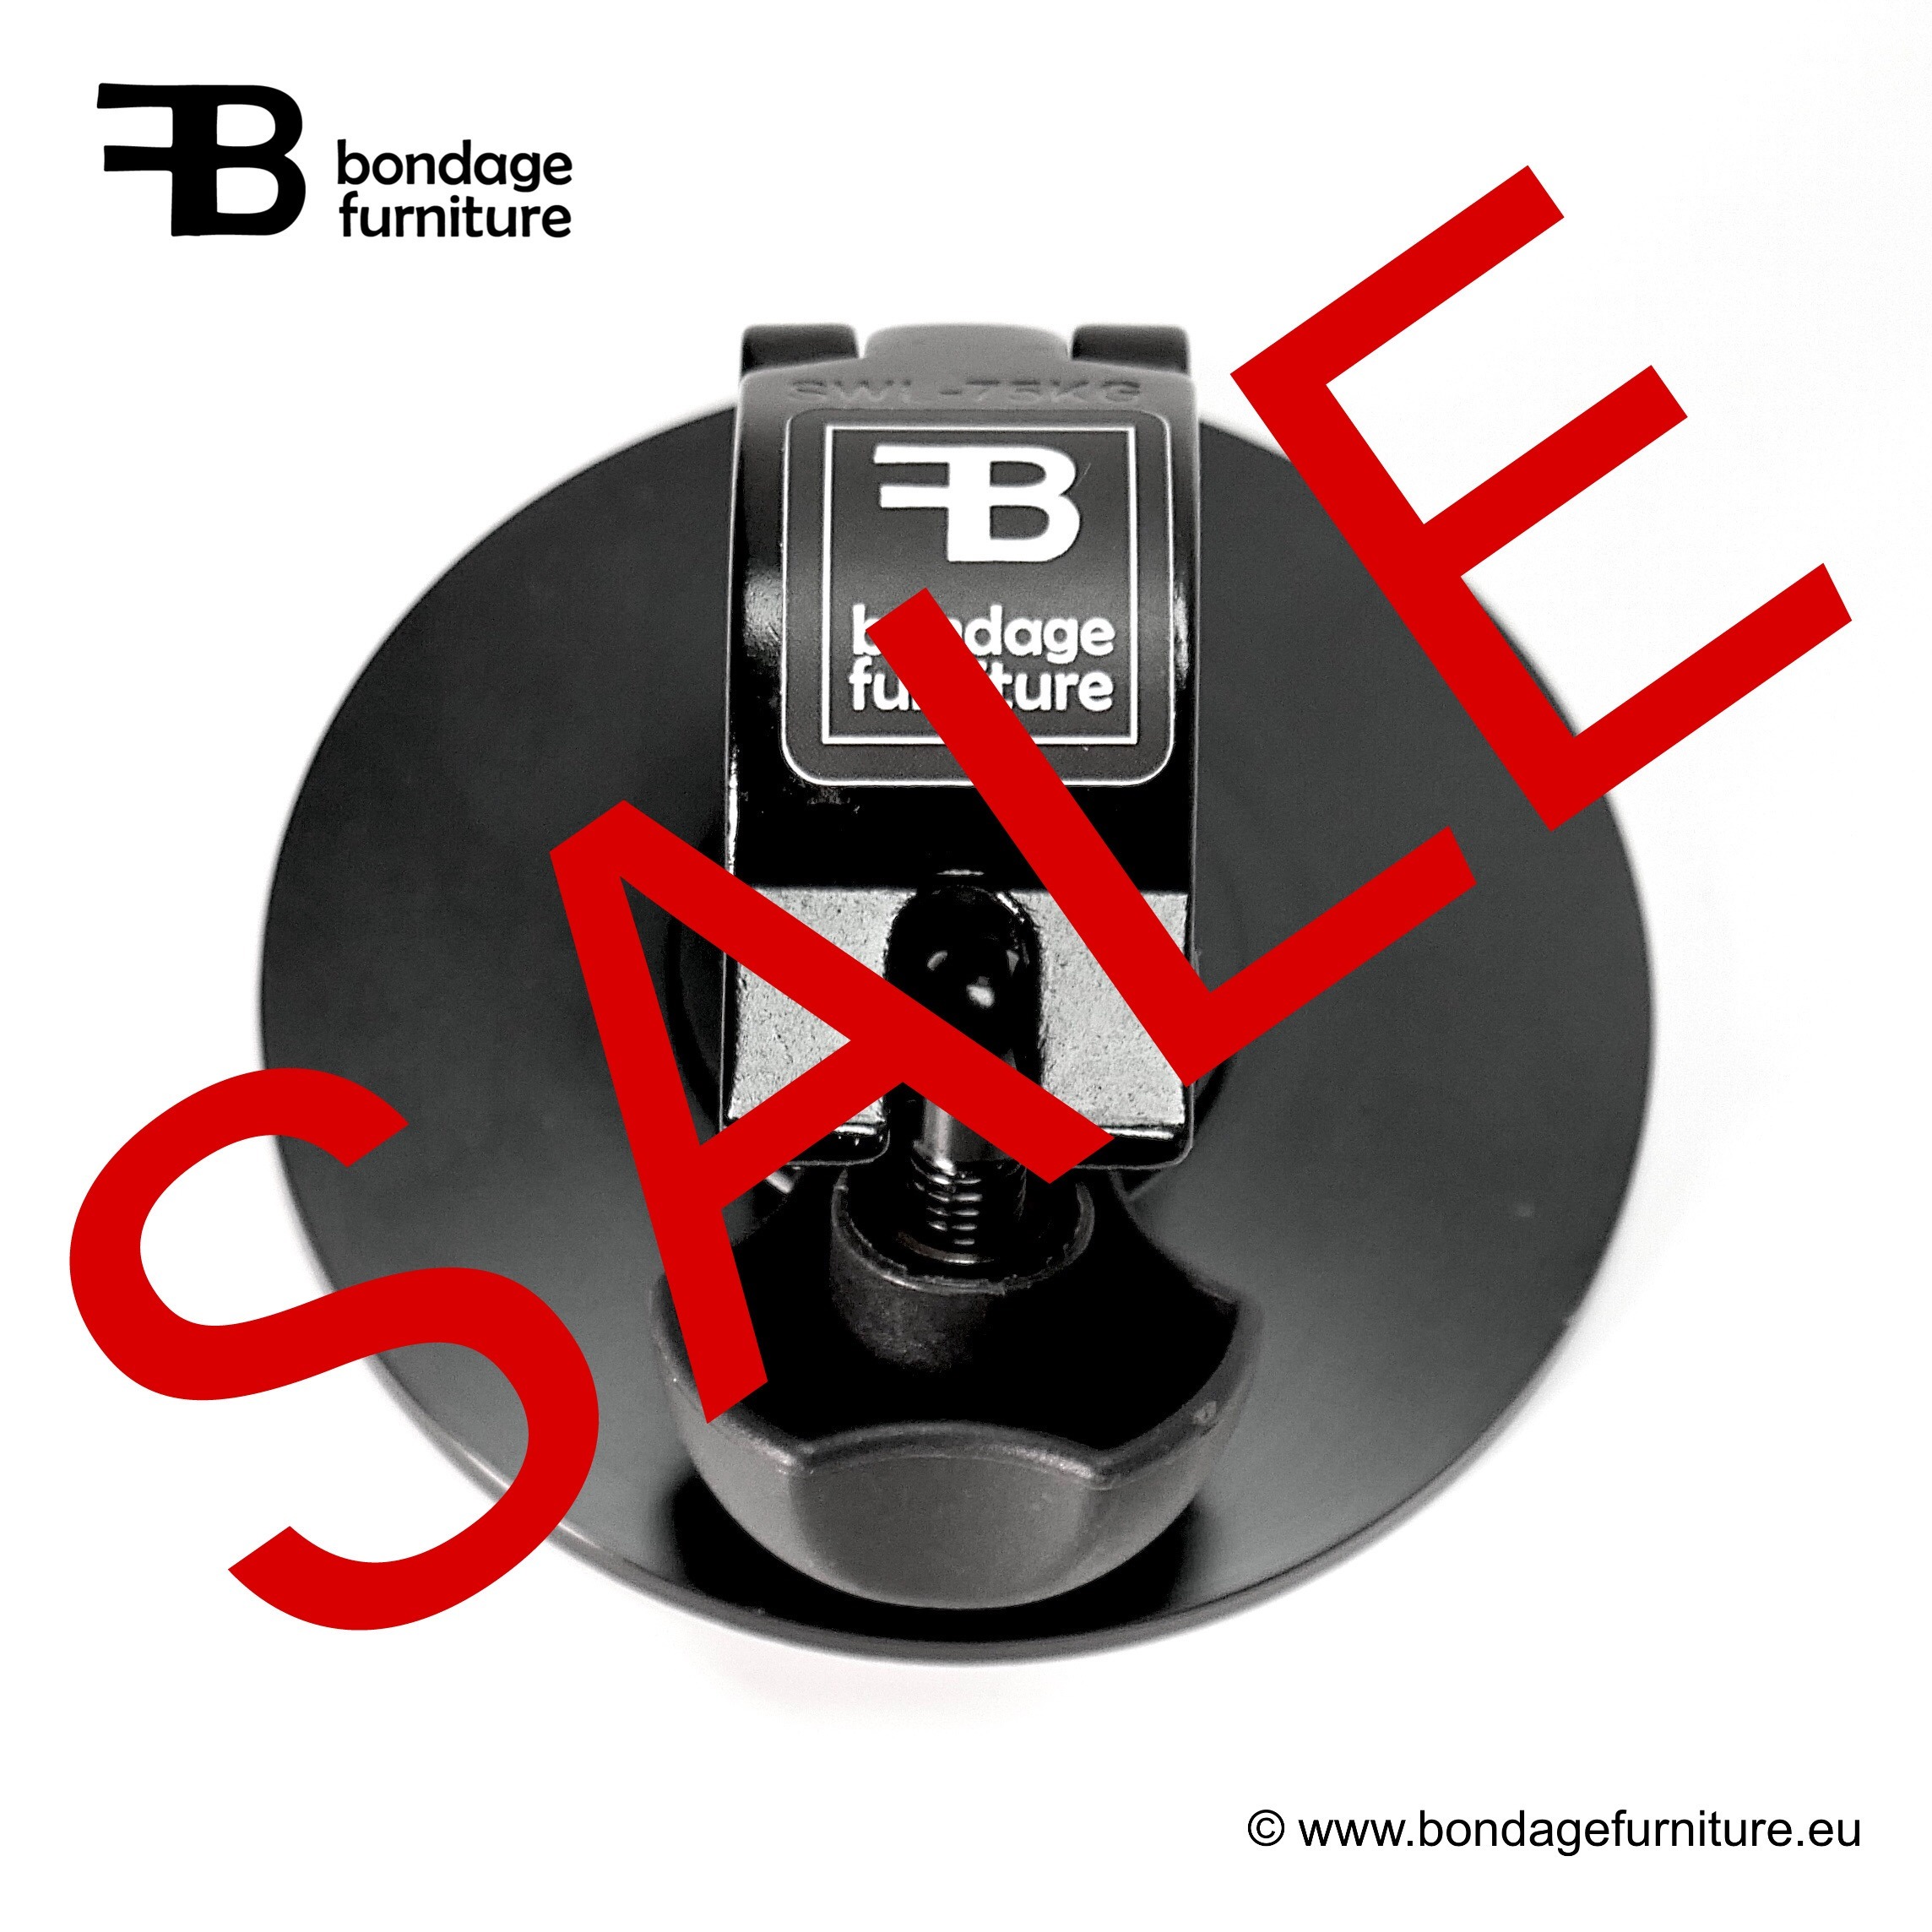 Sale - Offers in our SM Shop from Bondage Furniture